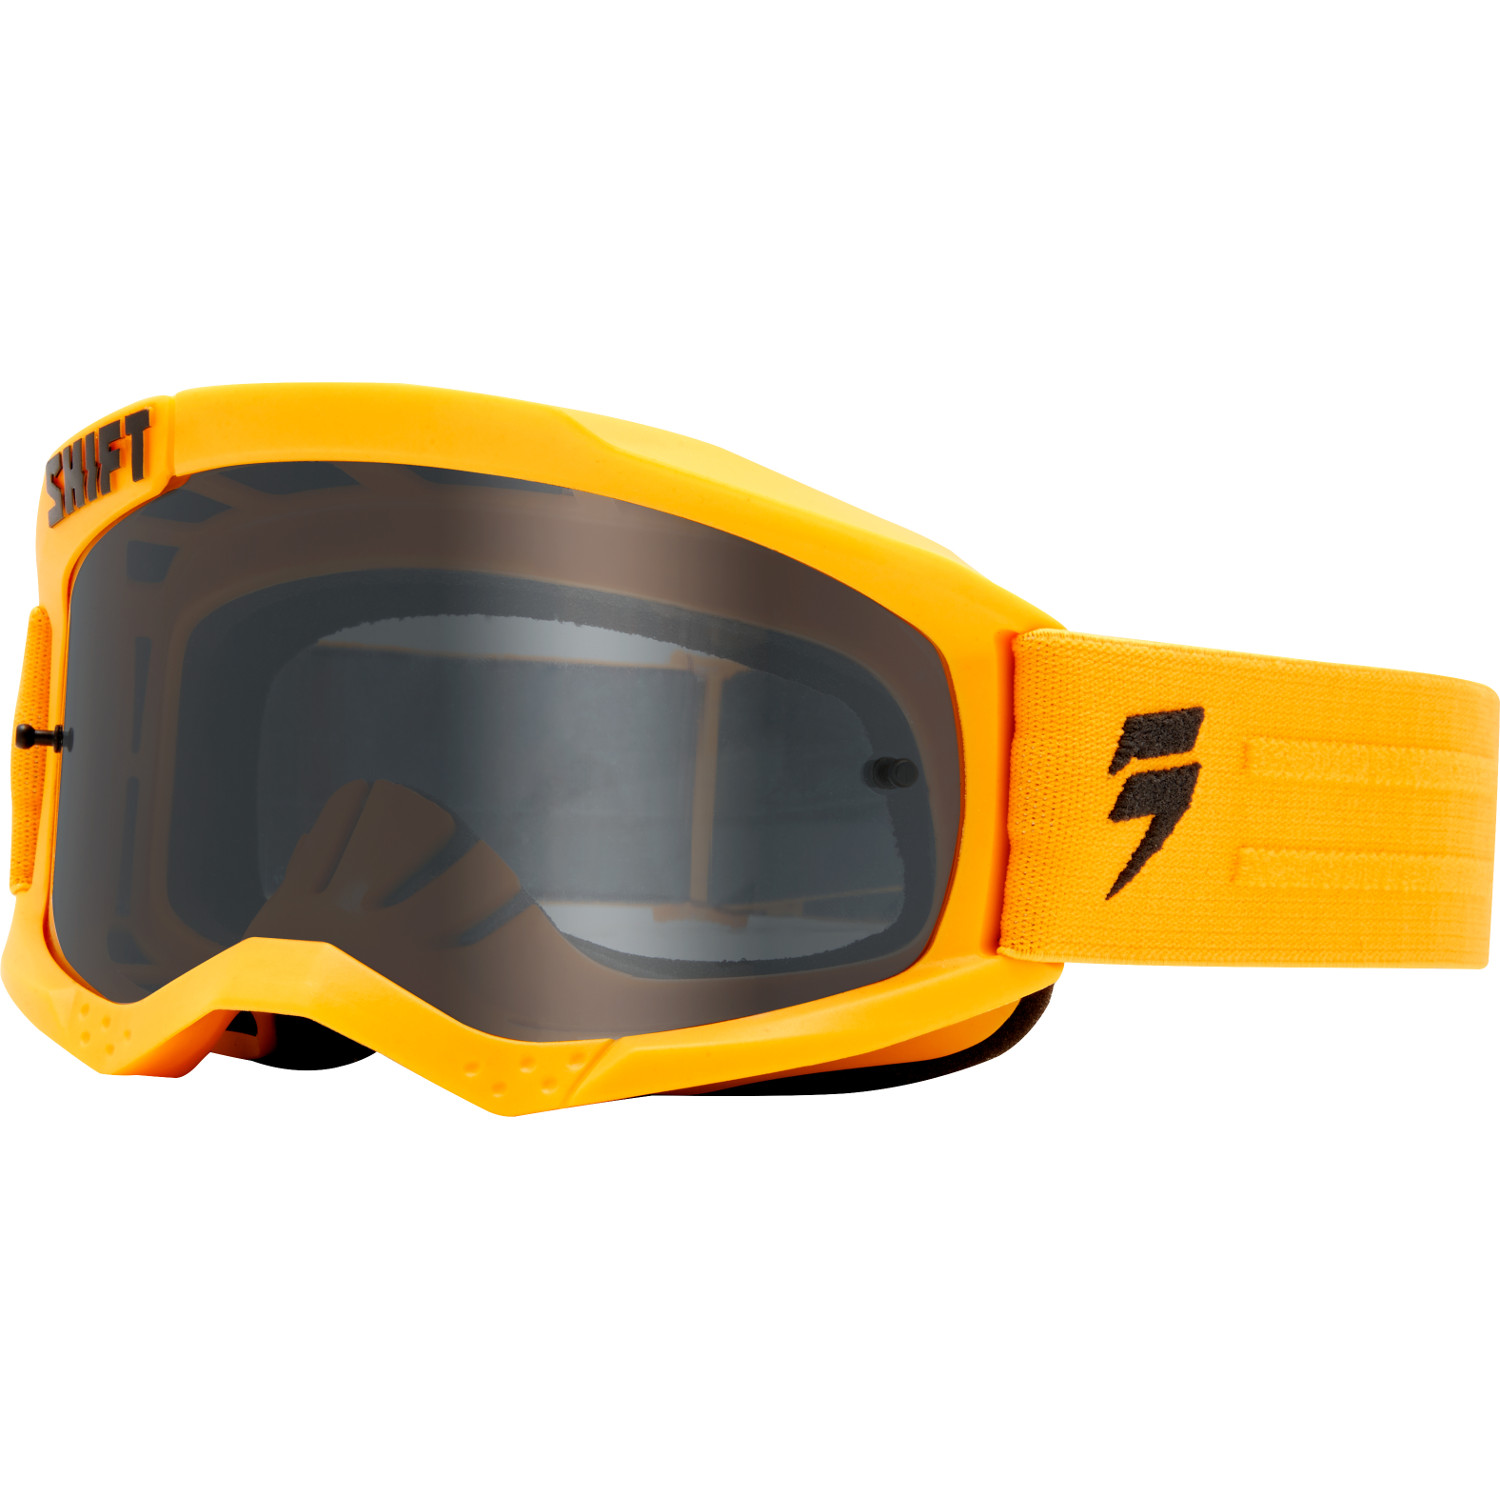 Shift Crossbrille Whit3 Label Gelb